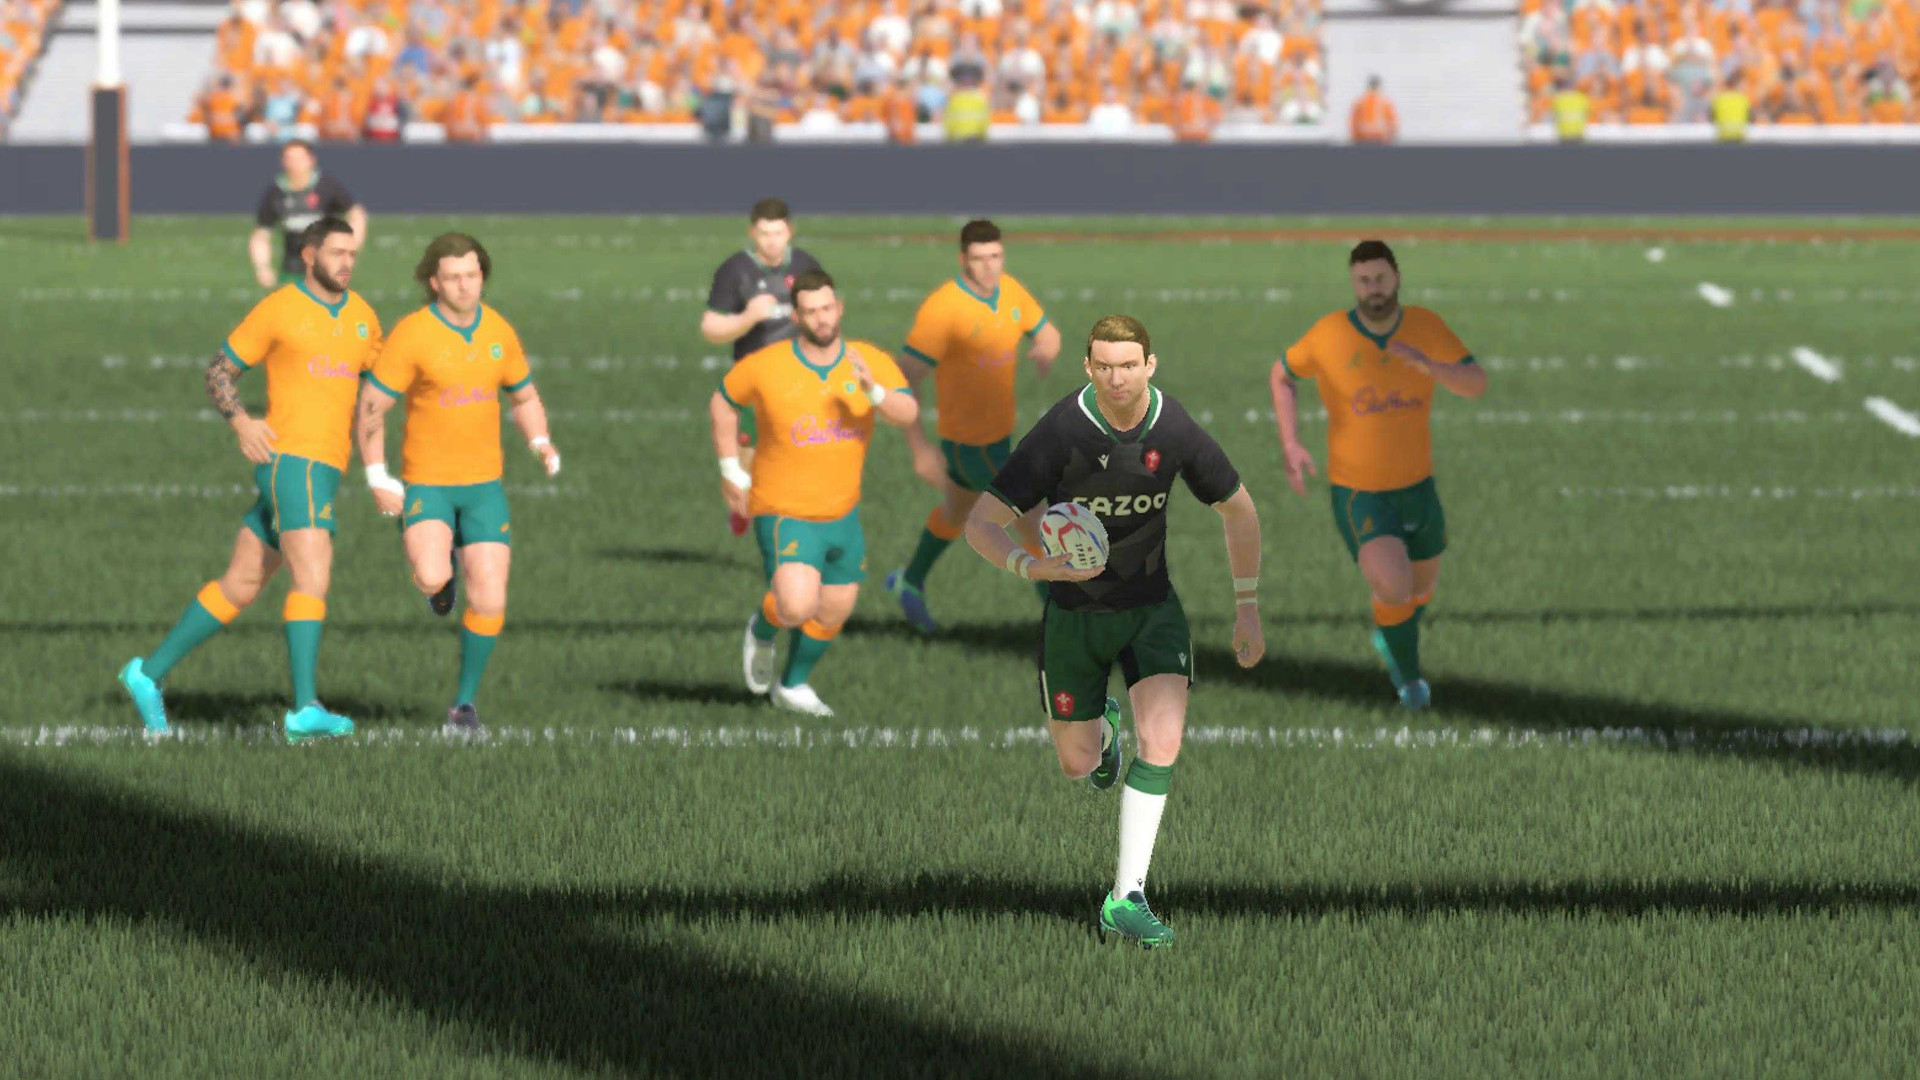 Rugby 22 review